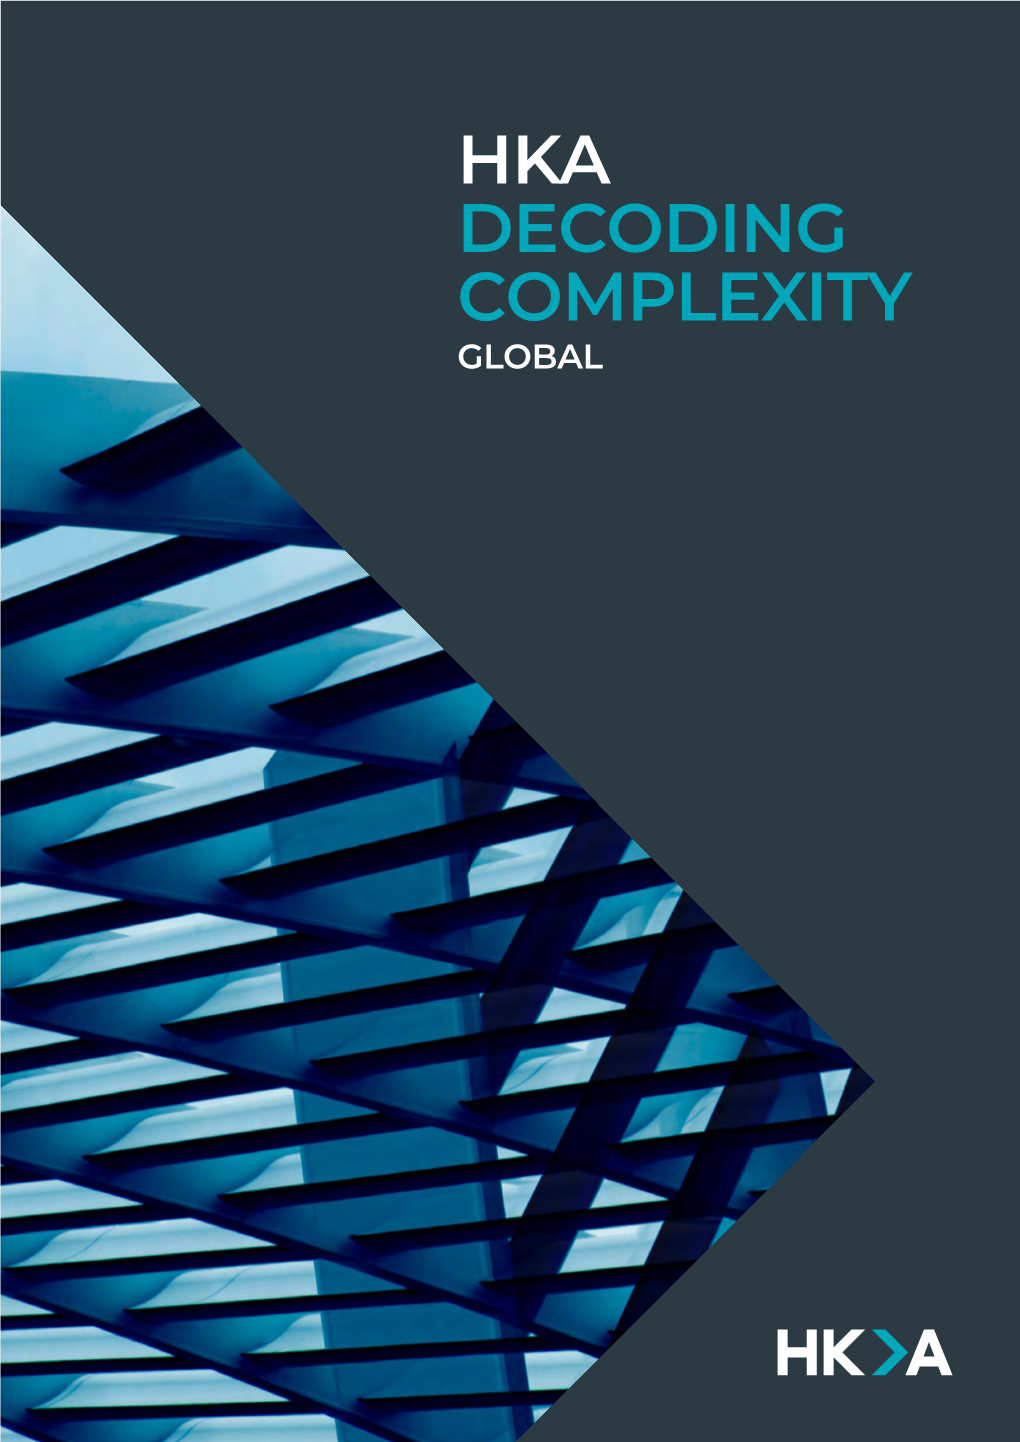 HKA DECODING COMPLEXITY GLOBAL Contents